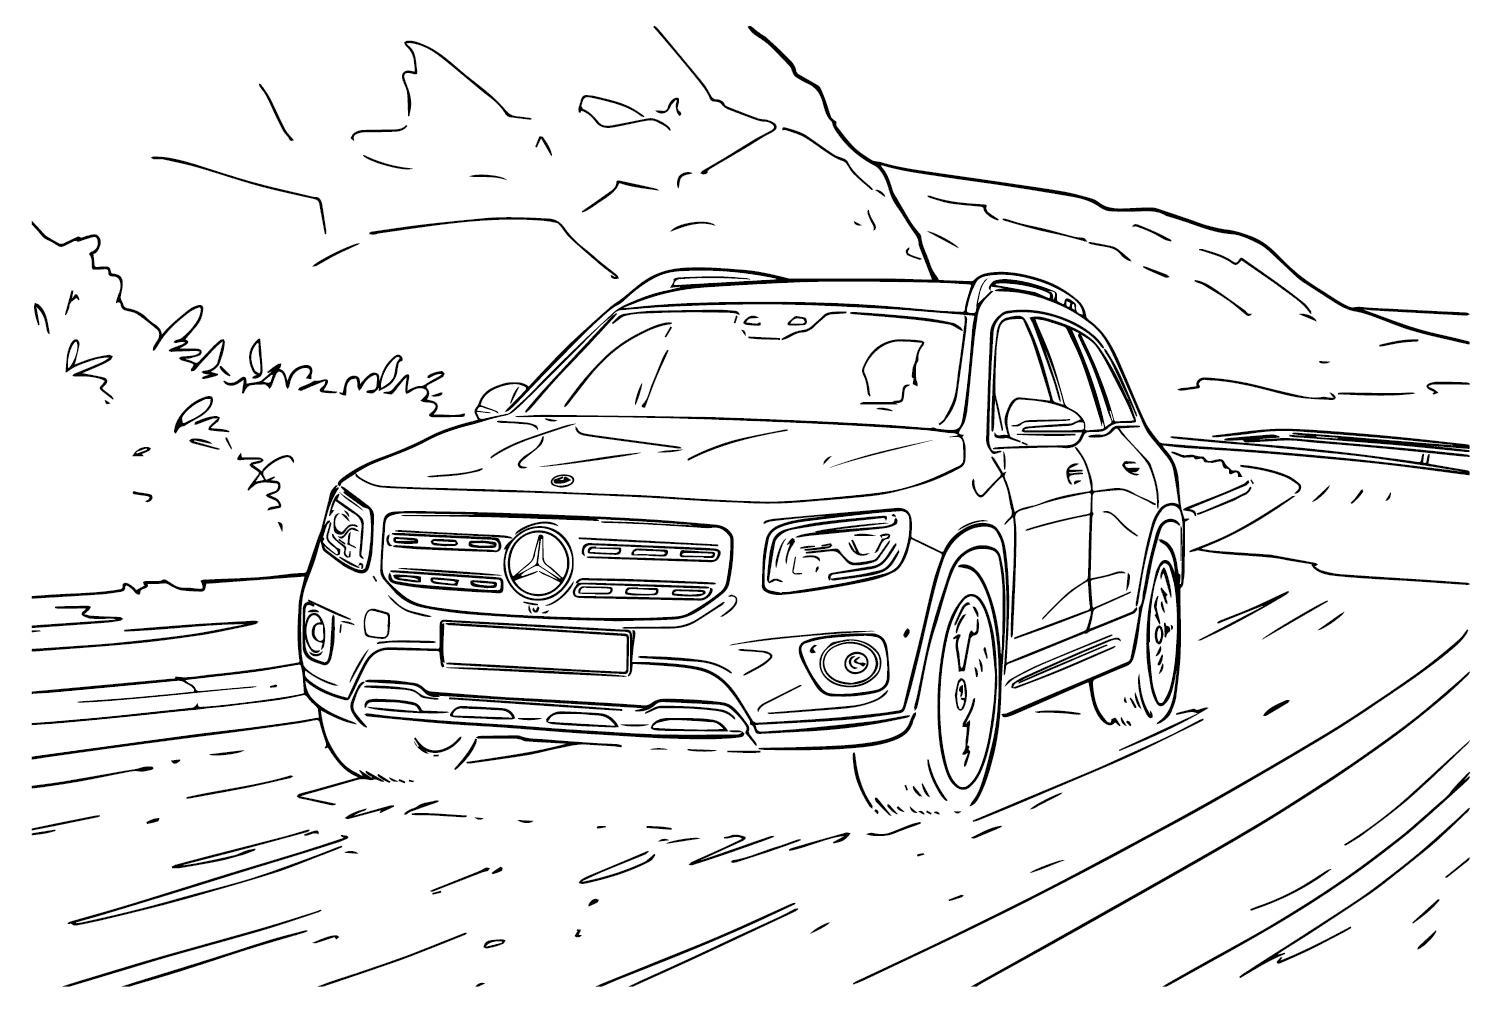 Mercedes-Benz GLS Coloring Page from Mercedes-Benz